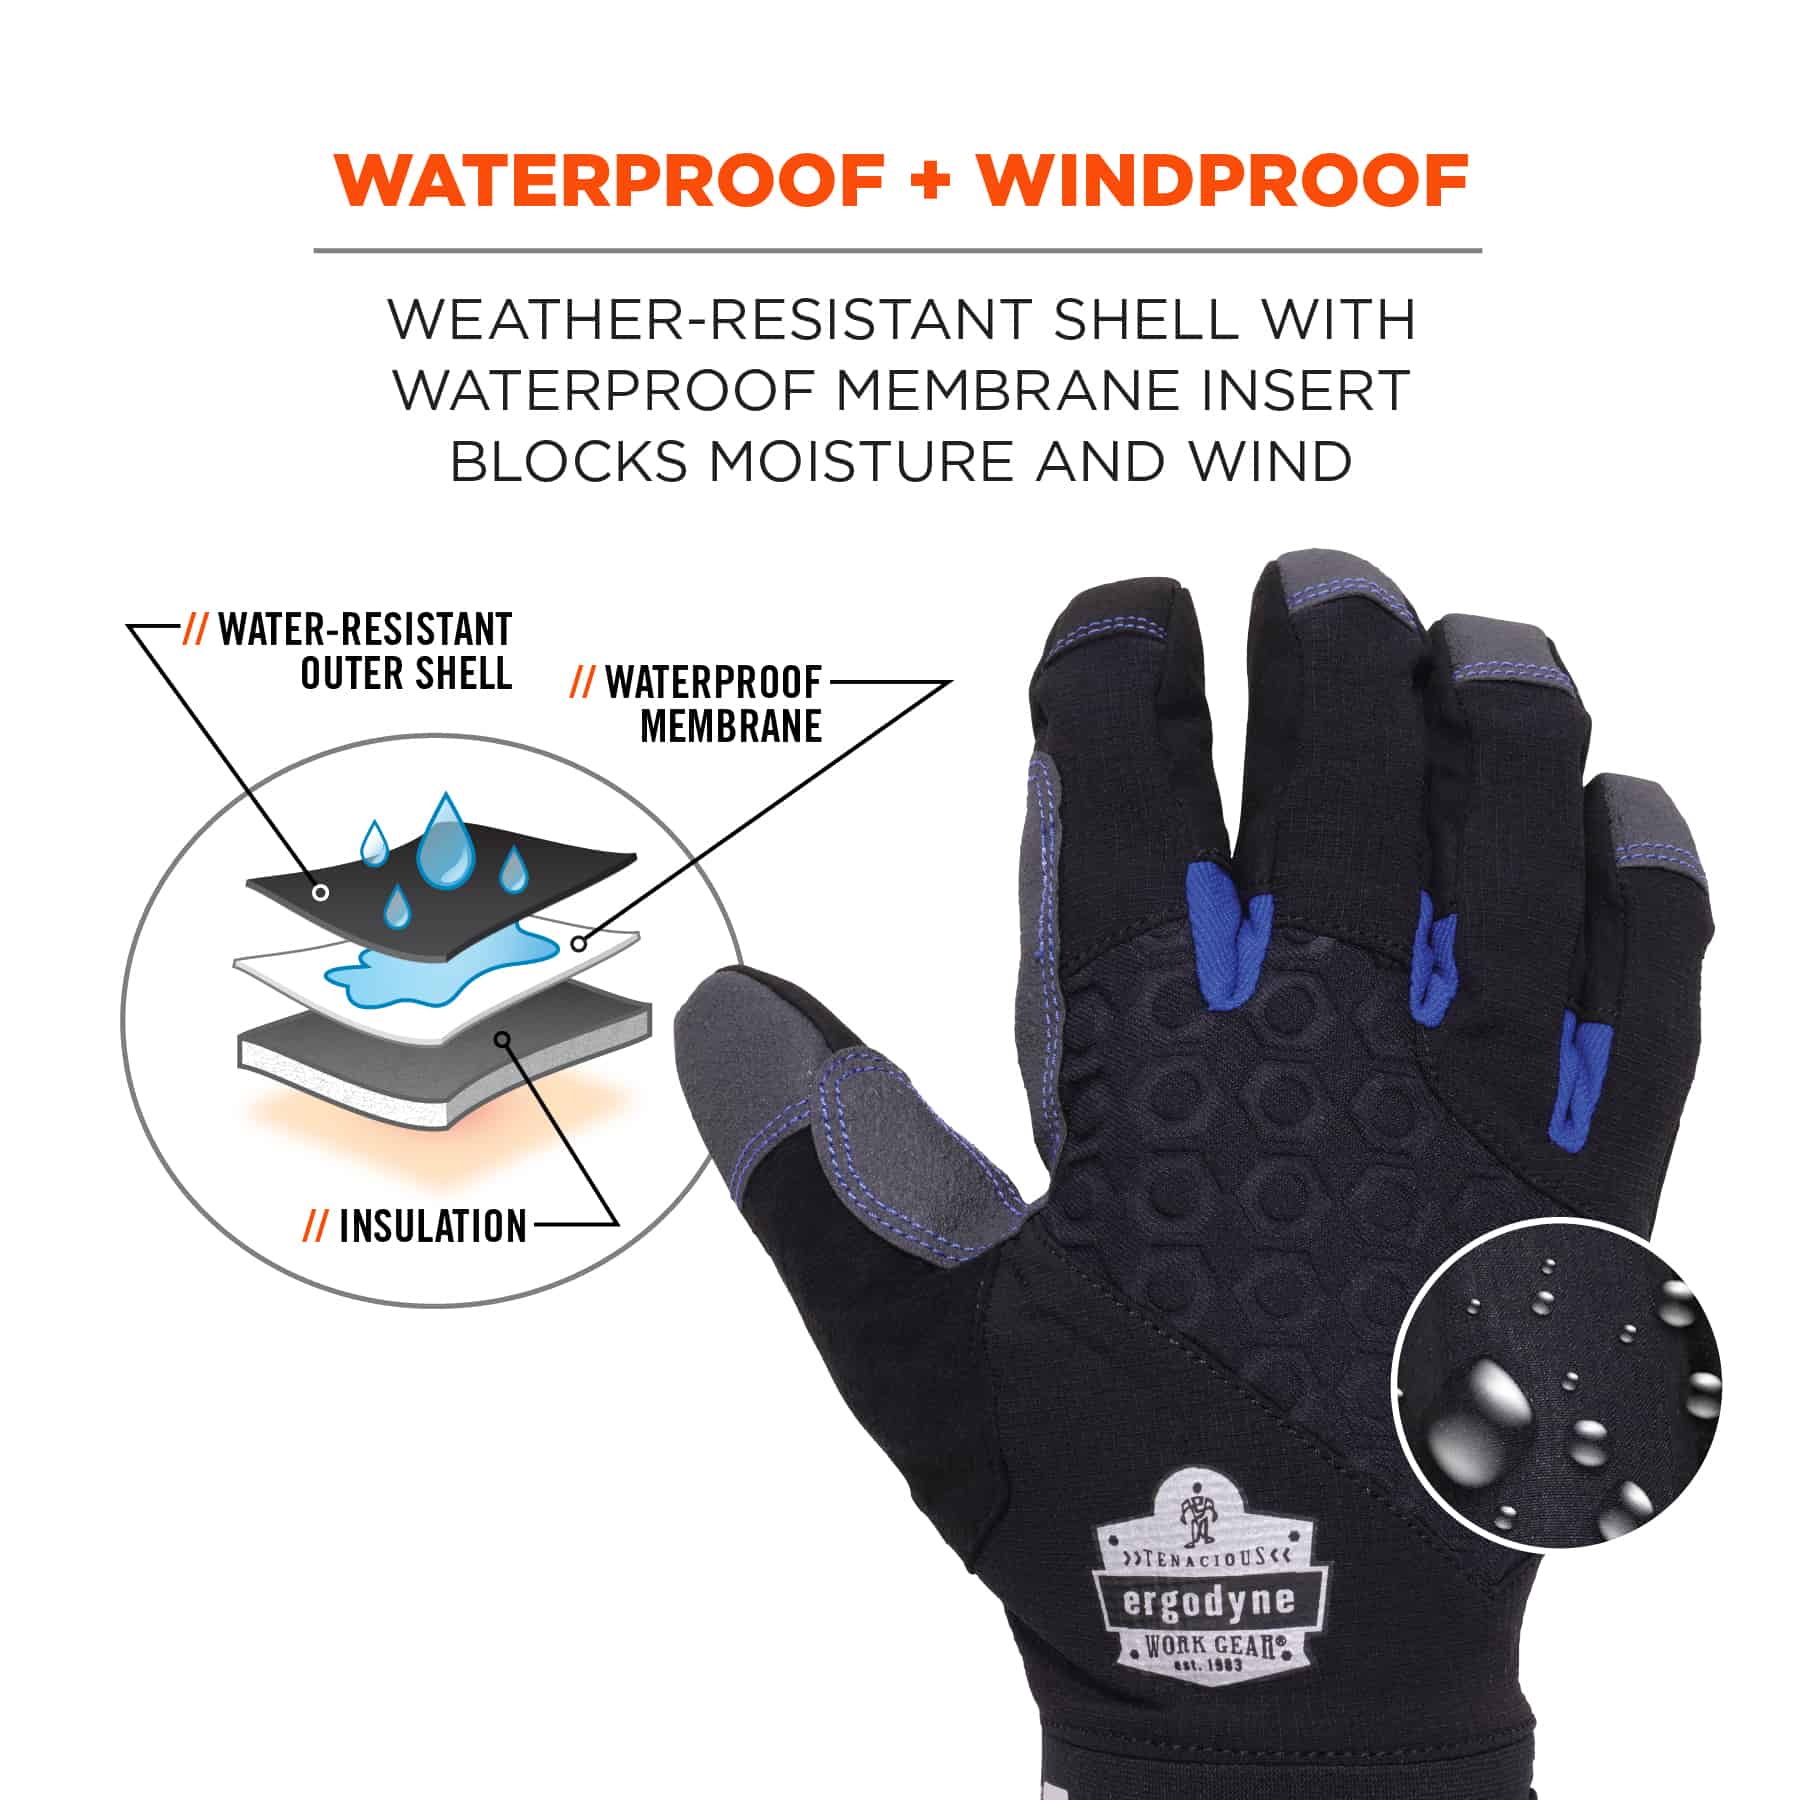 Everything You Need to Know About Fire Resistant Gloves - Superior